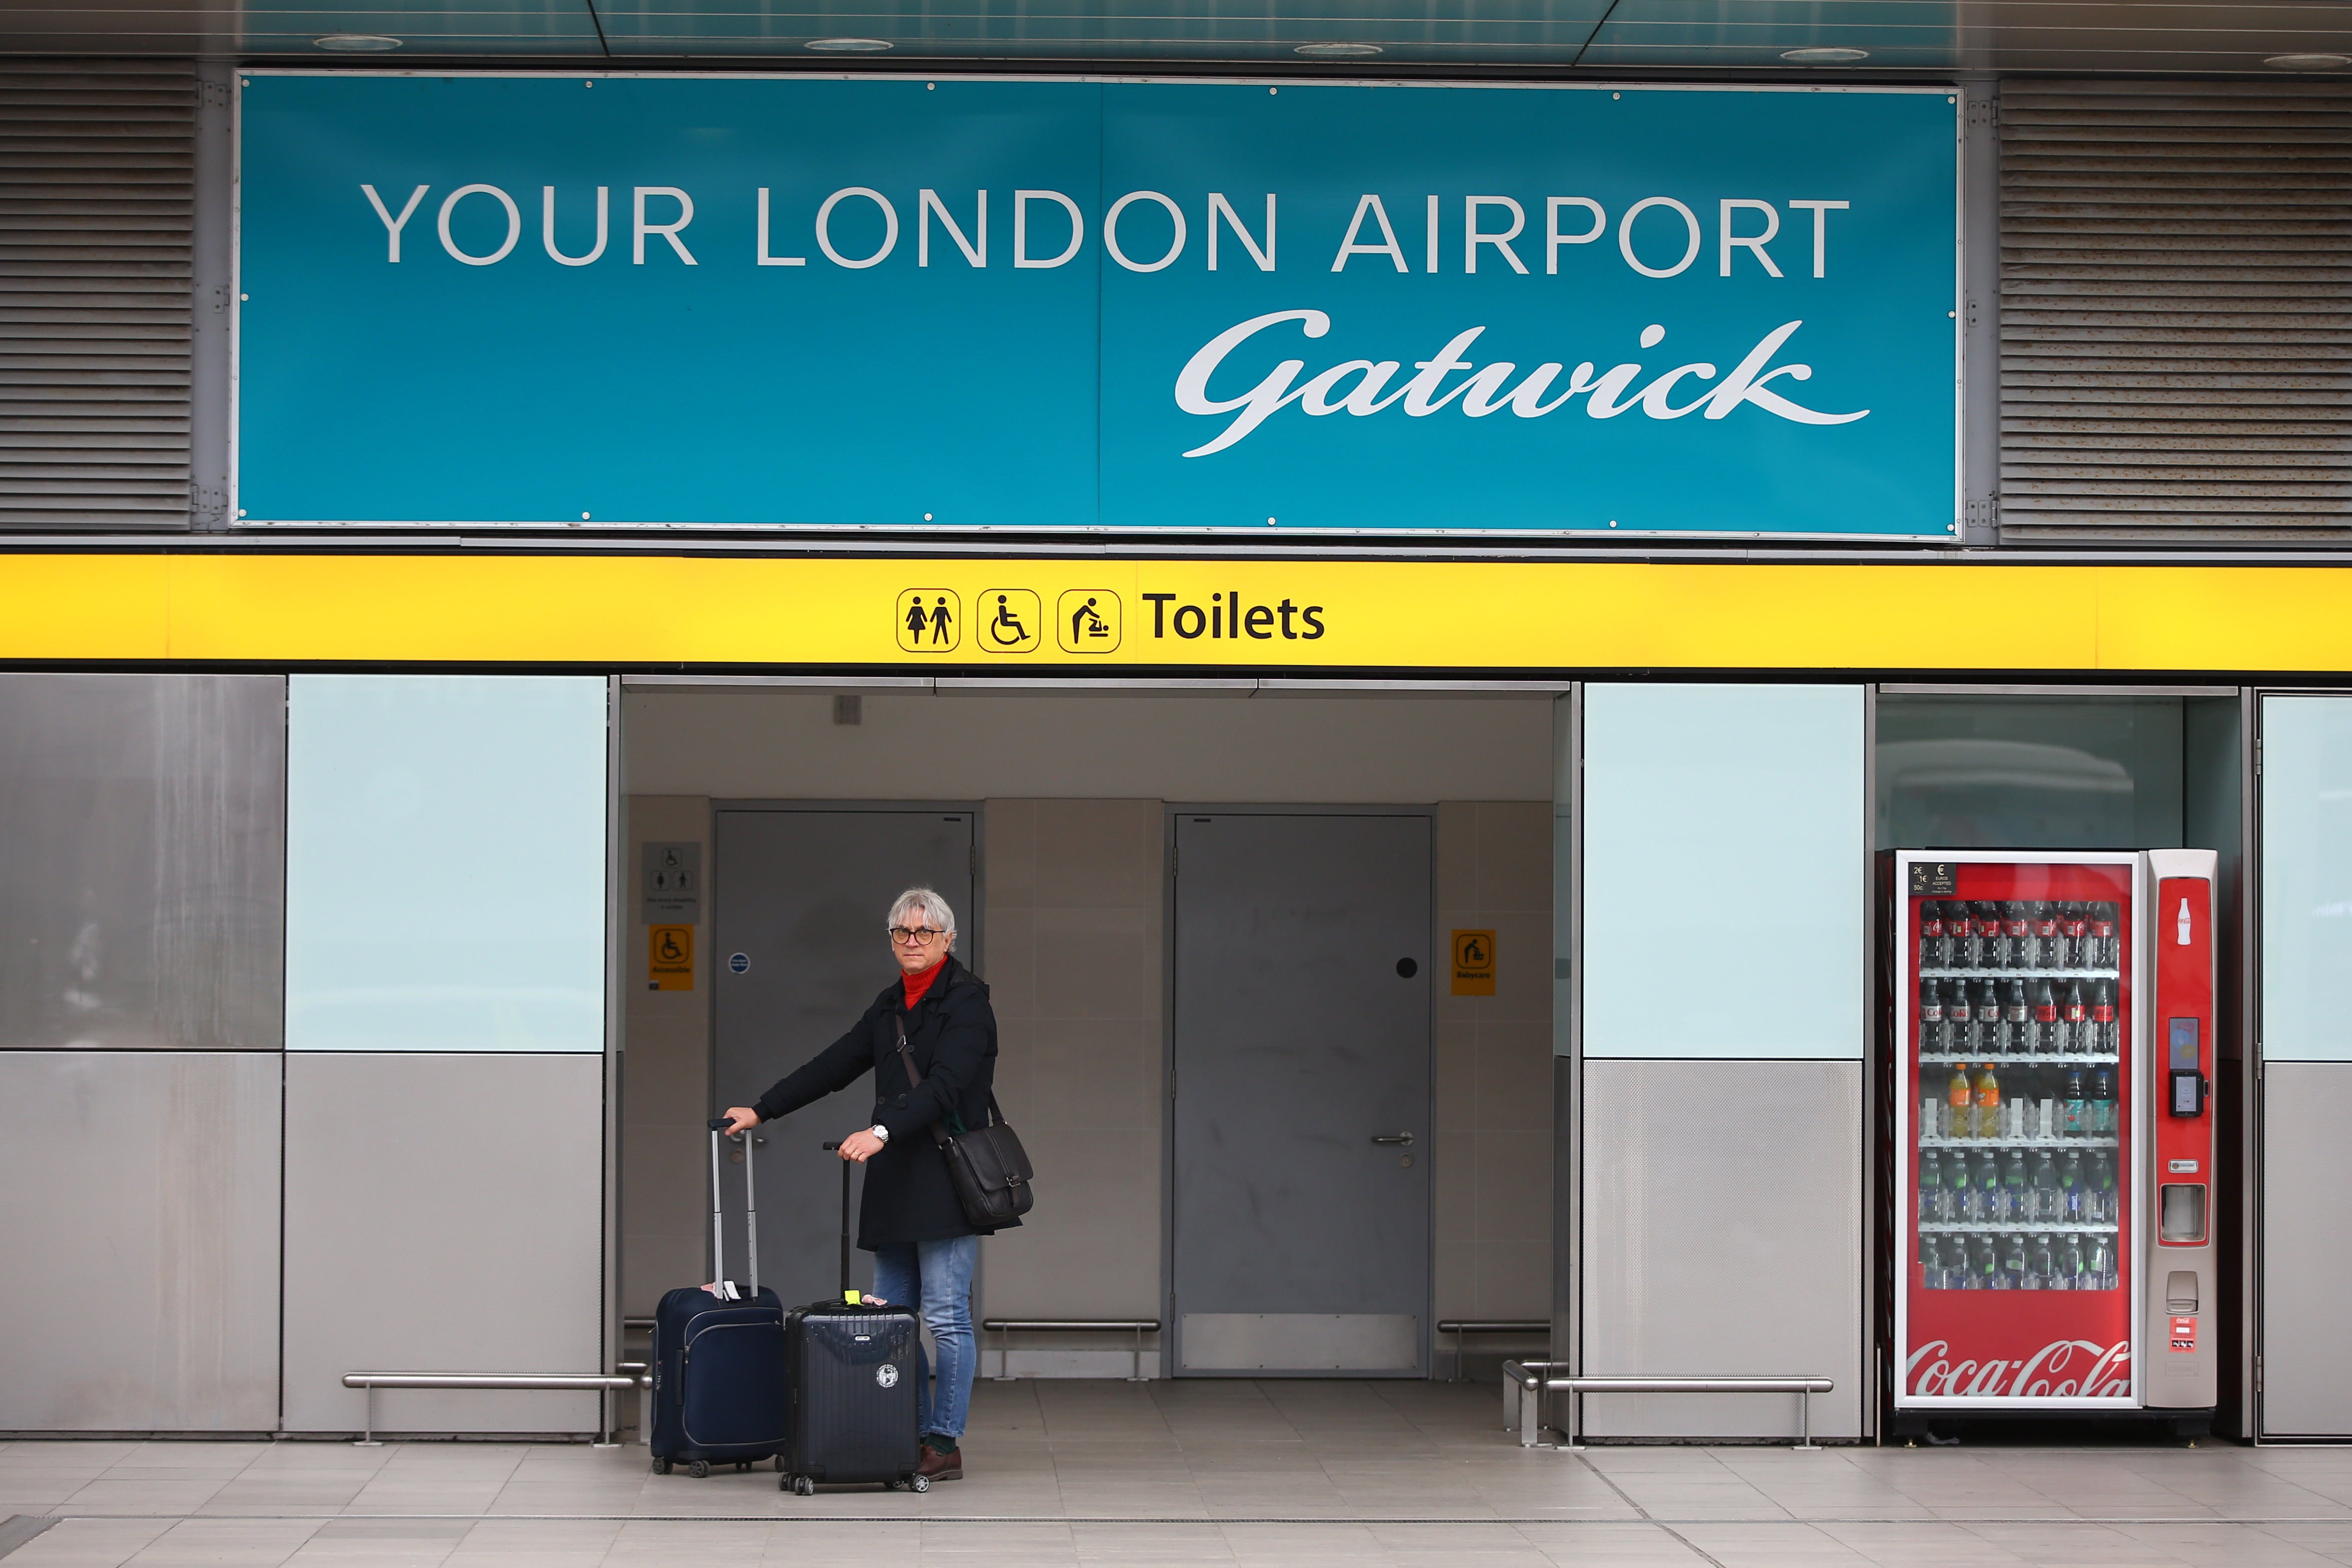 Gatwick has imposed a cap of 800 movements (arrivals and departures) per day